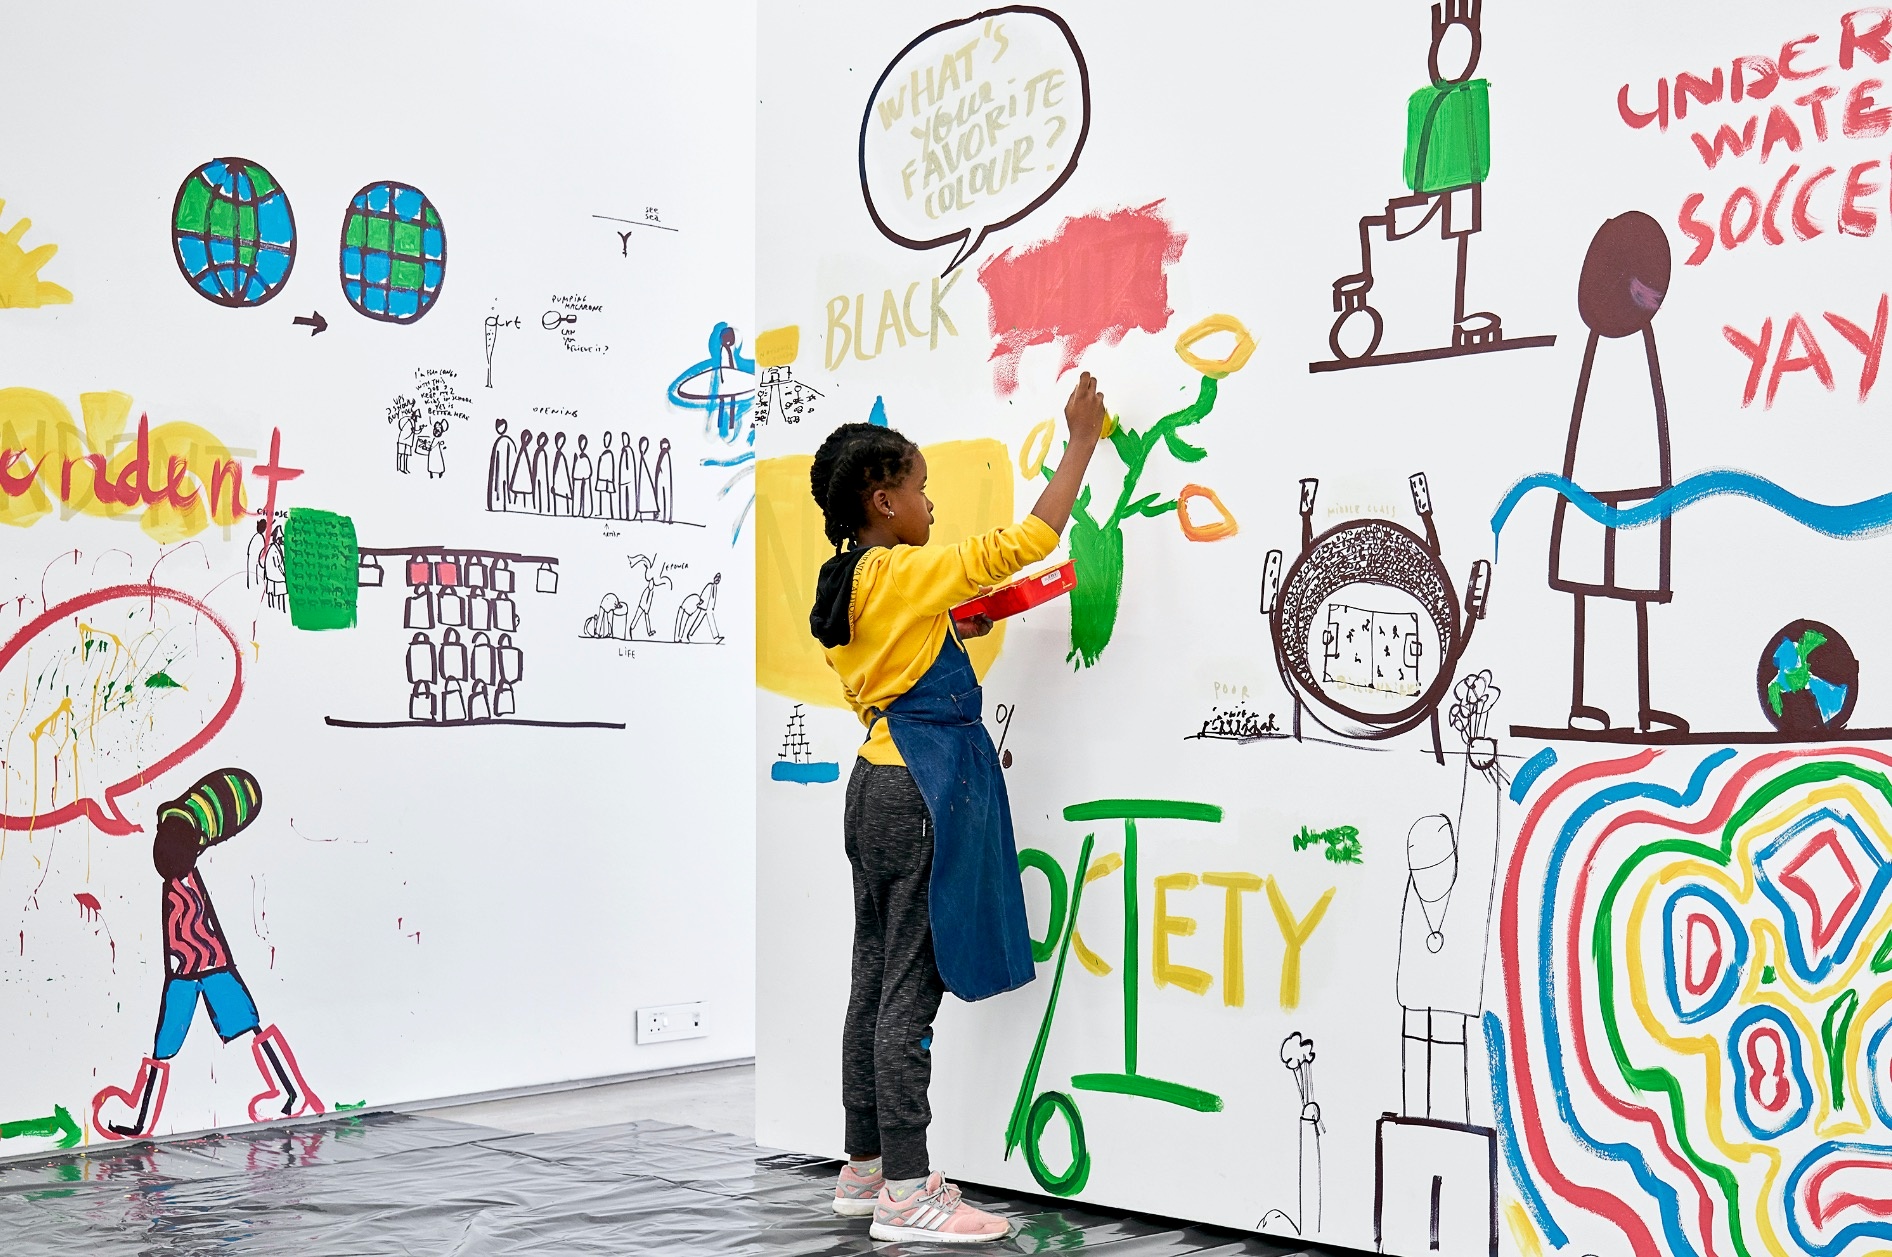 Photograph from the ‘Colourful Erasure’ event in A4’s Gallery. On the right, a young participant paints in colour onto the gallery walls, “erasing” the black and white drawings from Dan Perjovschi's ‘Black & White Cape Town Report’ exhibition.
